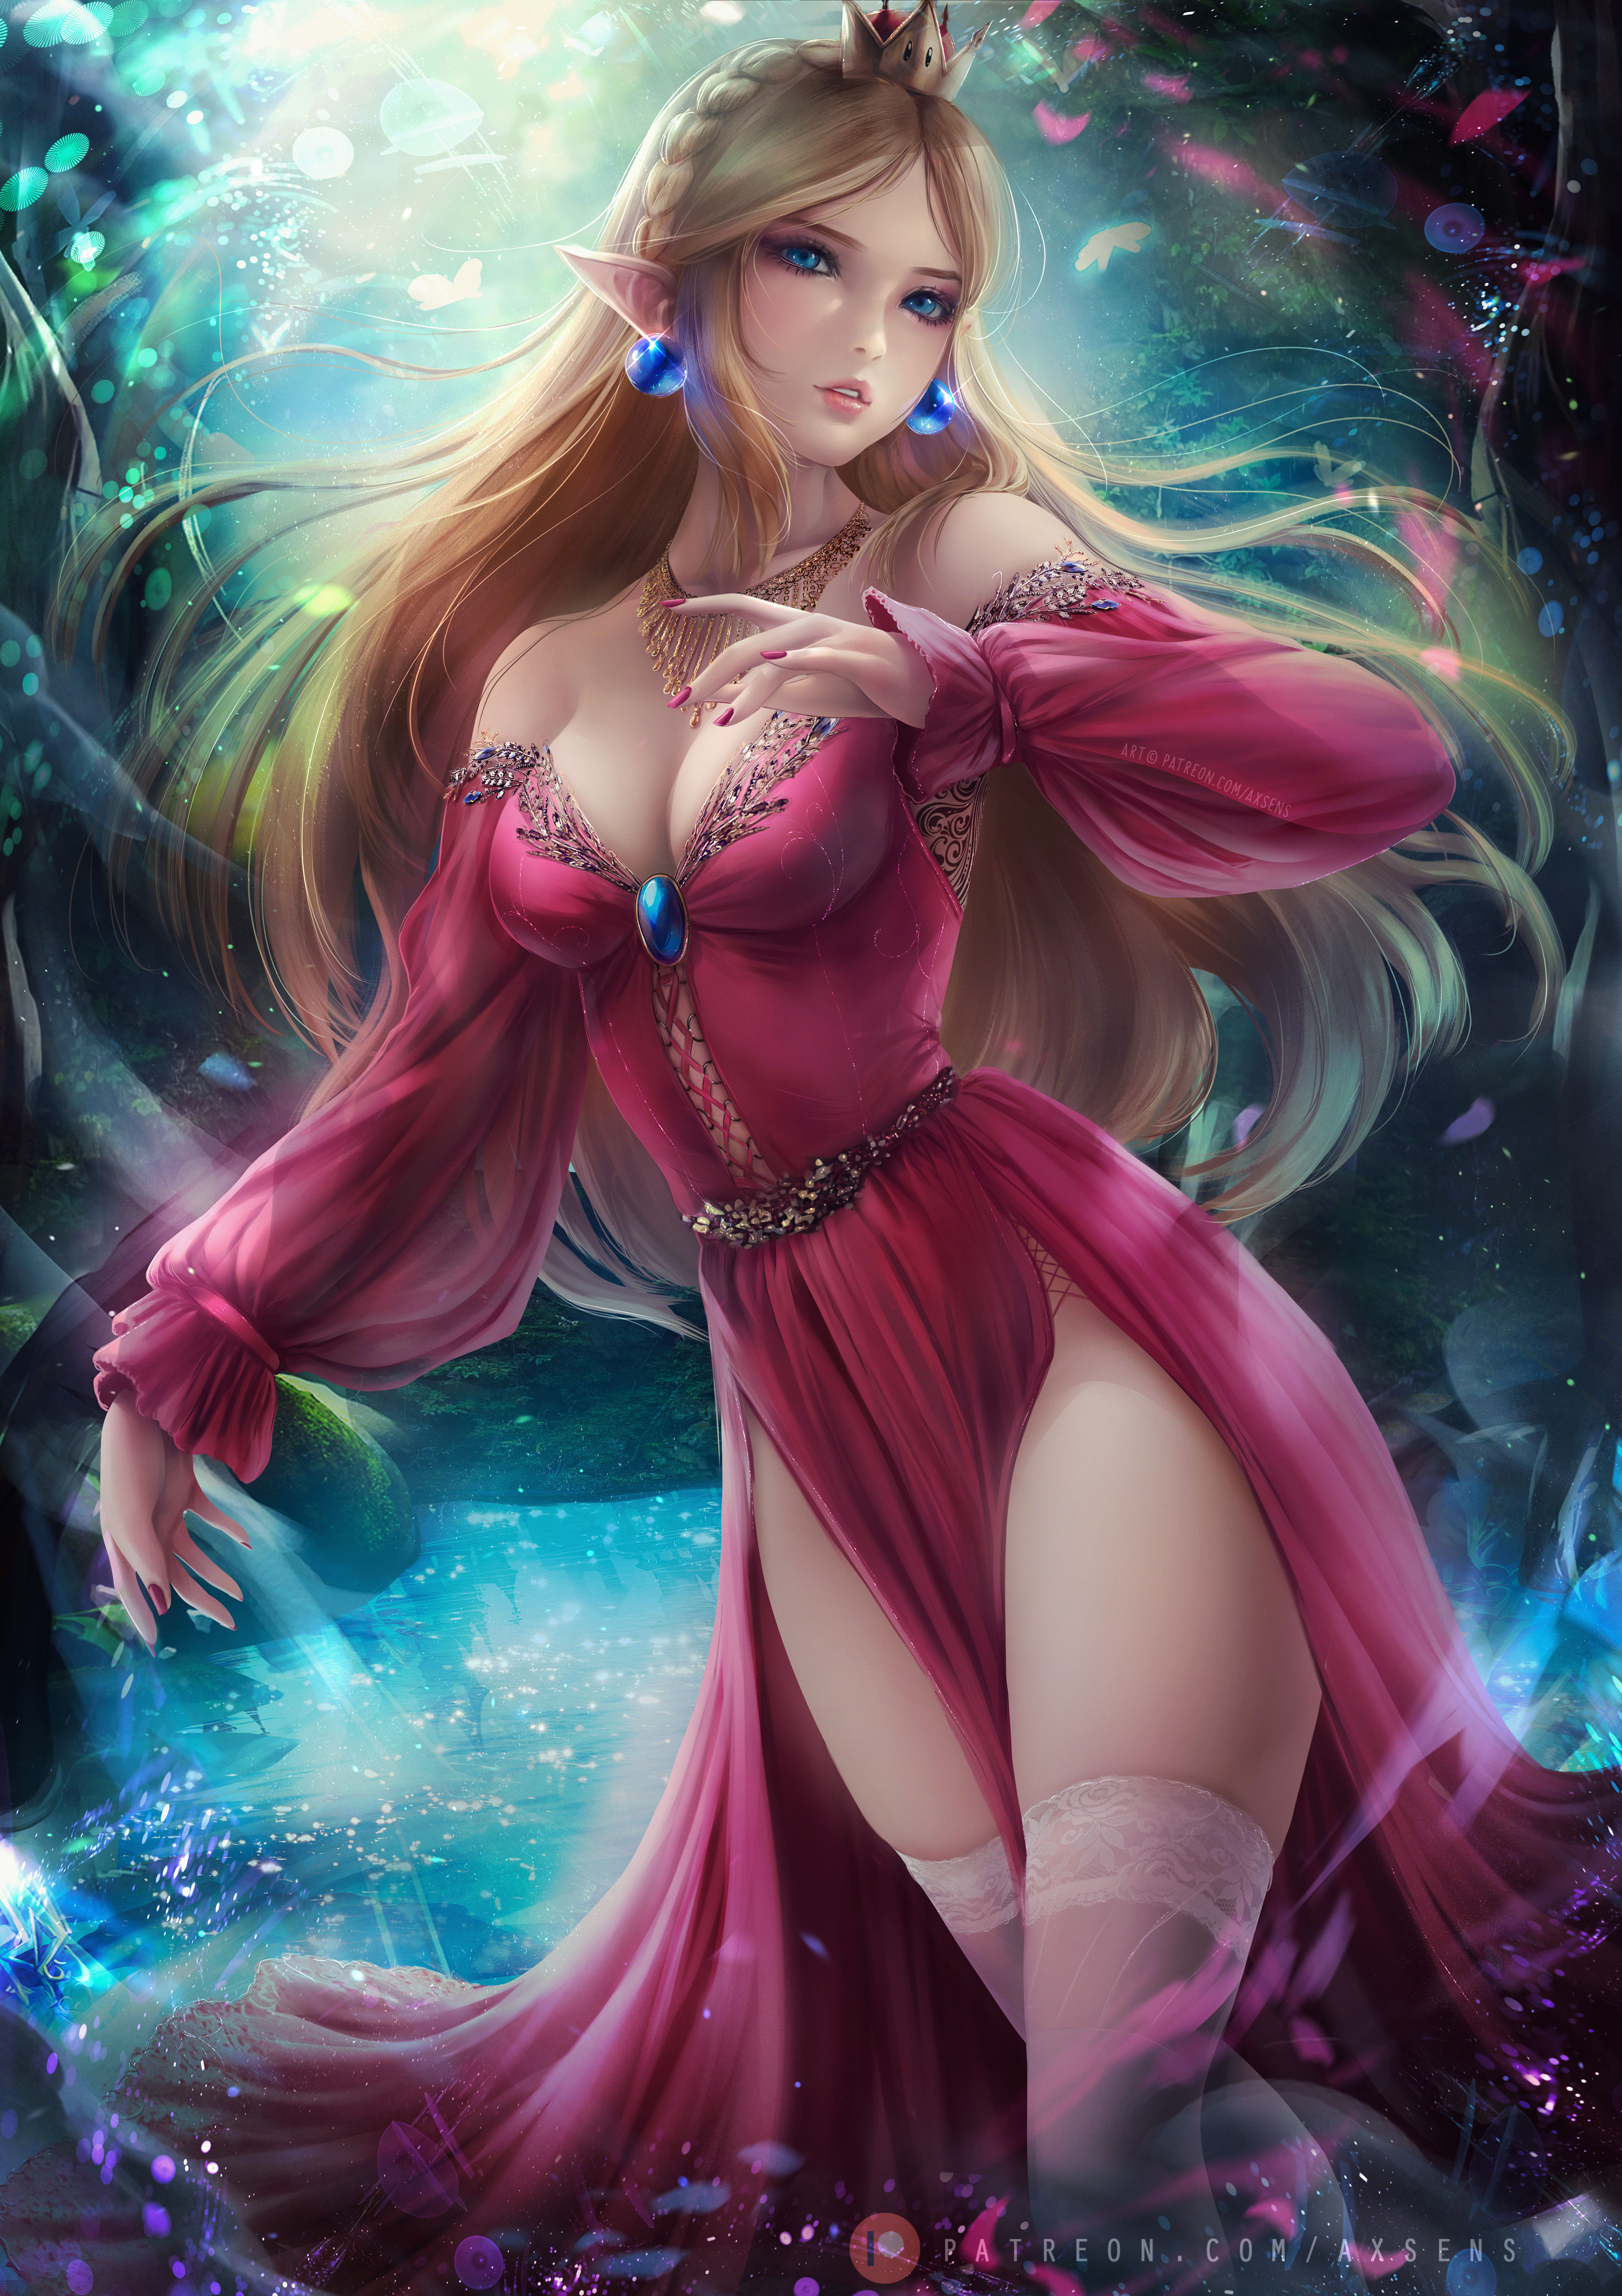 General 3532x5000 illustration artwork digital art fan art Axsens drawing long hair blonde Super Mario blue eyes video game characters video game girls boobs pointy ears thighs stockings painted nails red nails crown Princess Peach